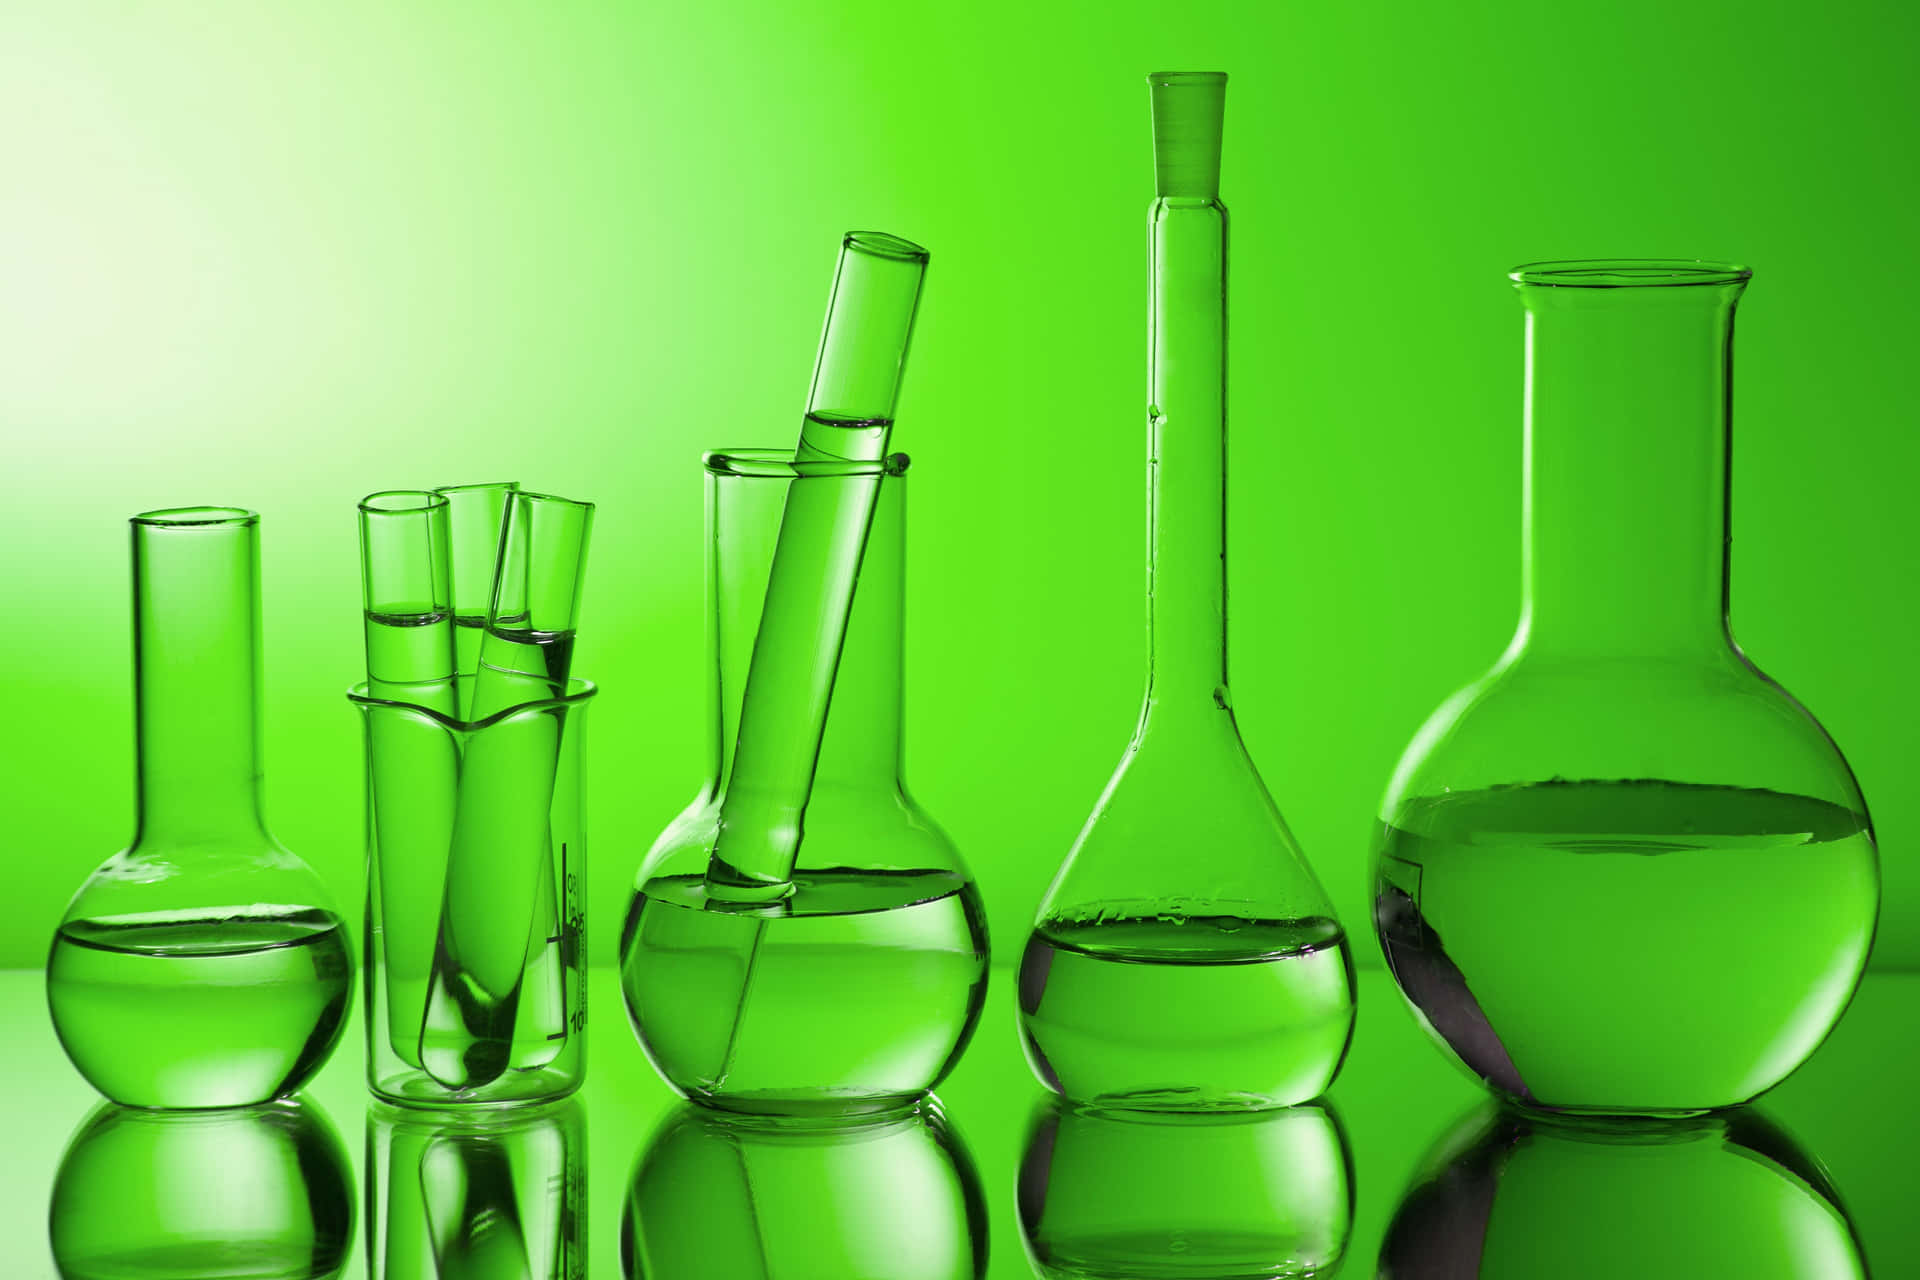 Green Laboratory Glassware On A Green Background